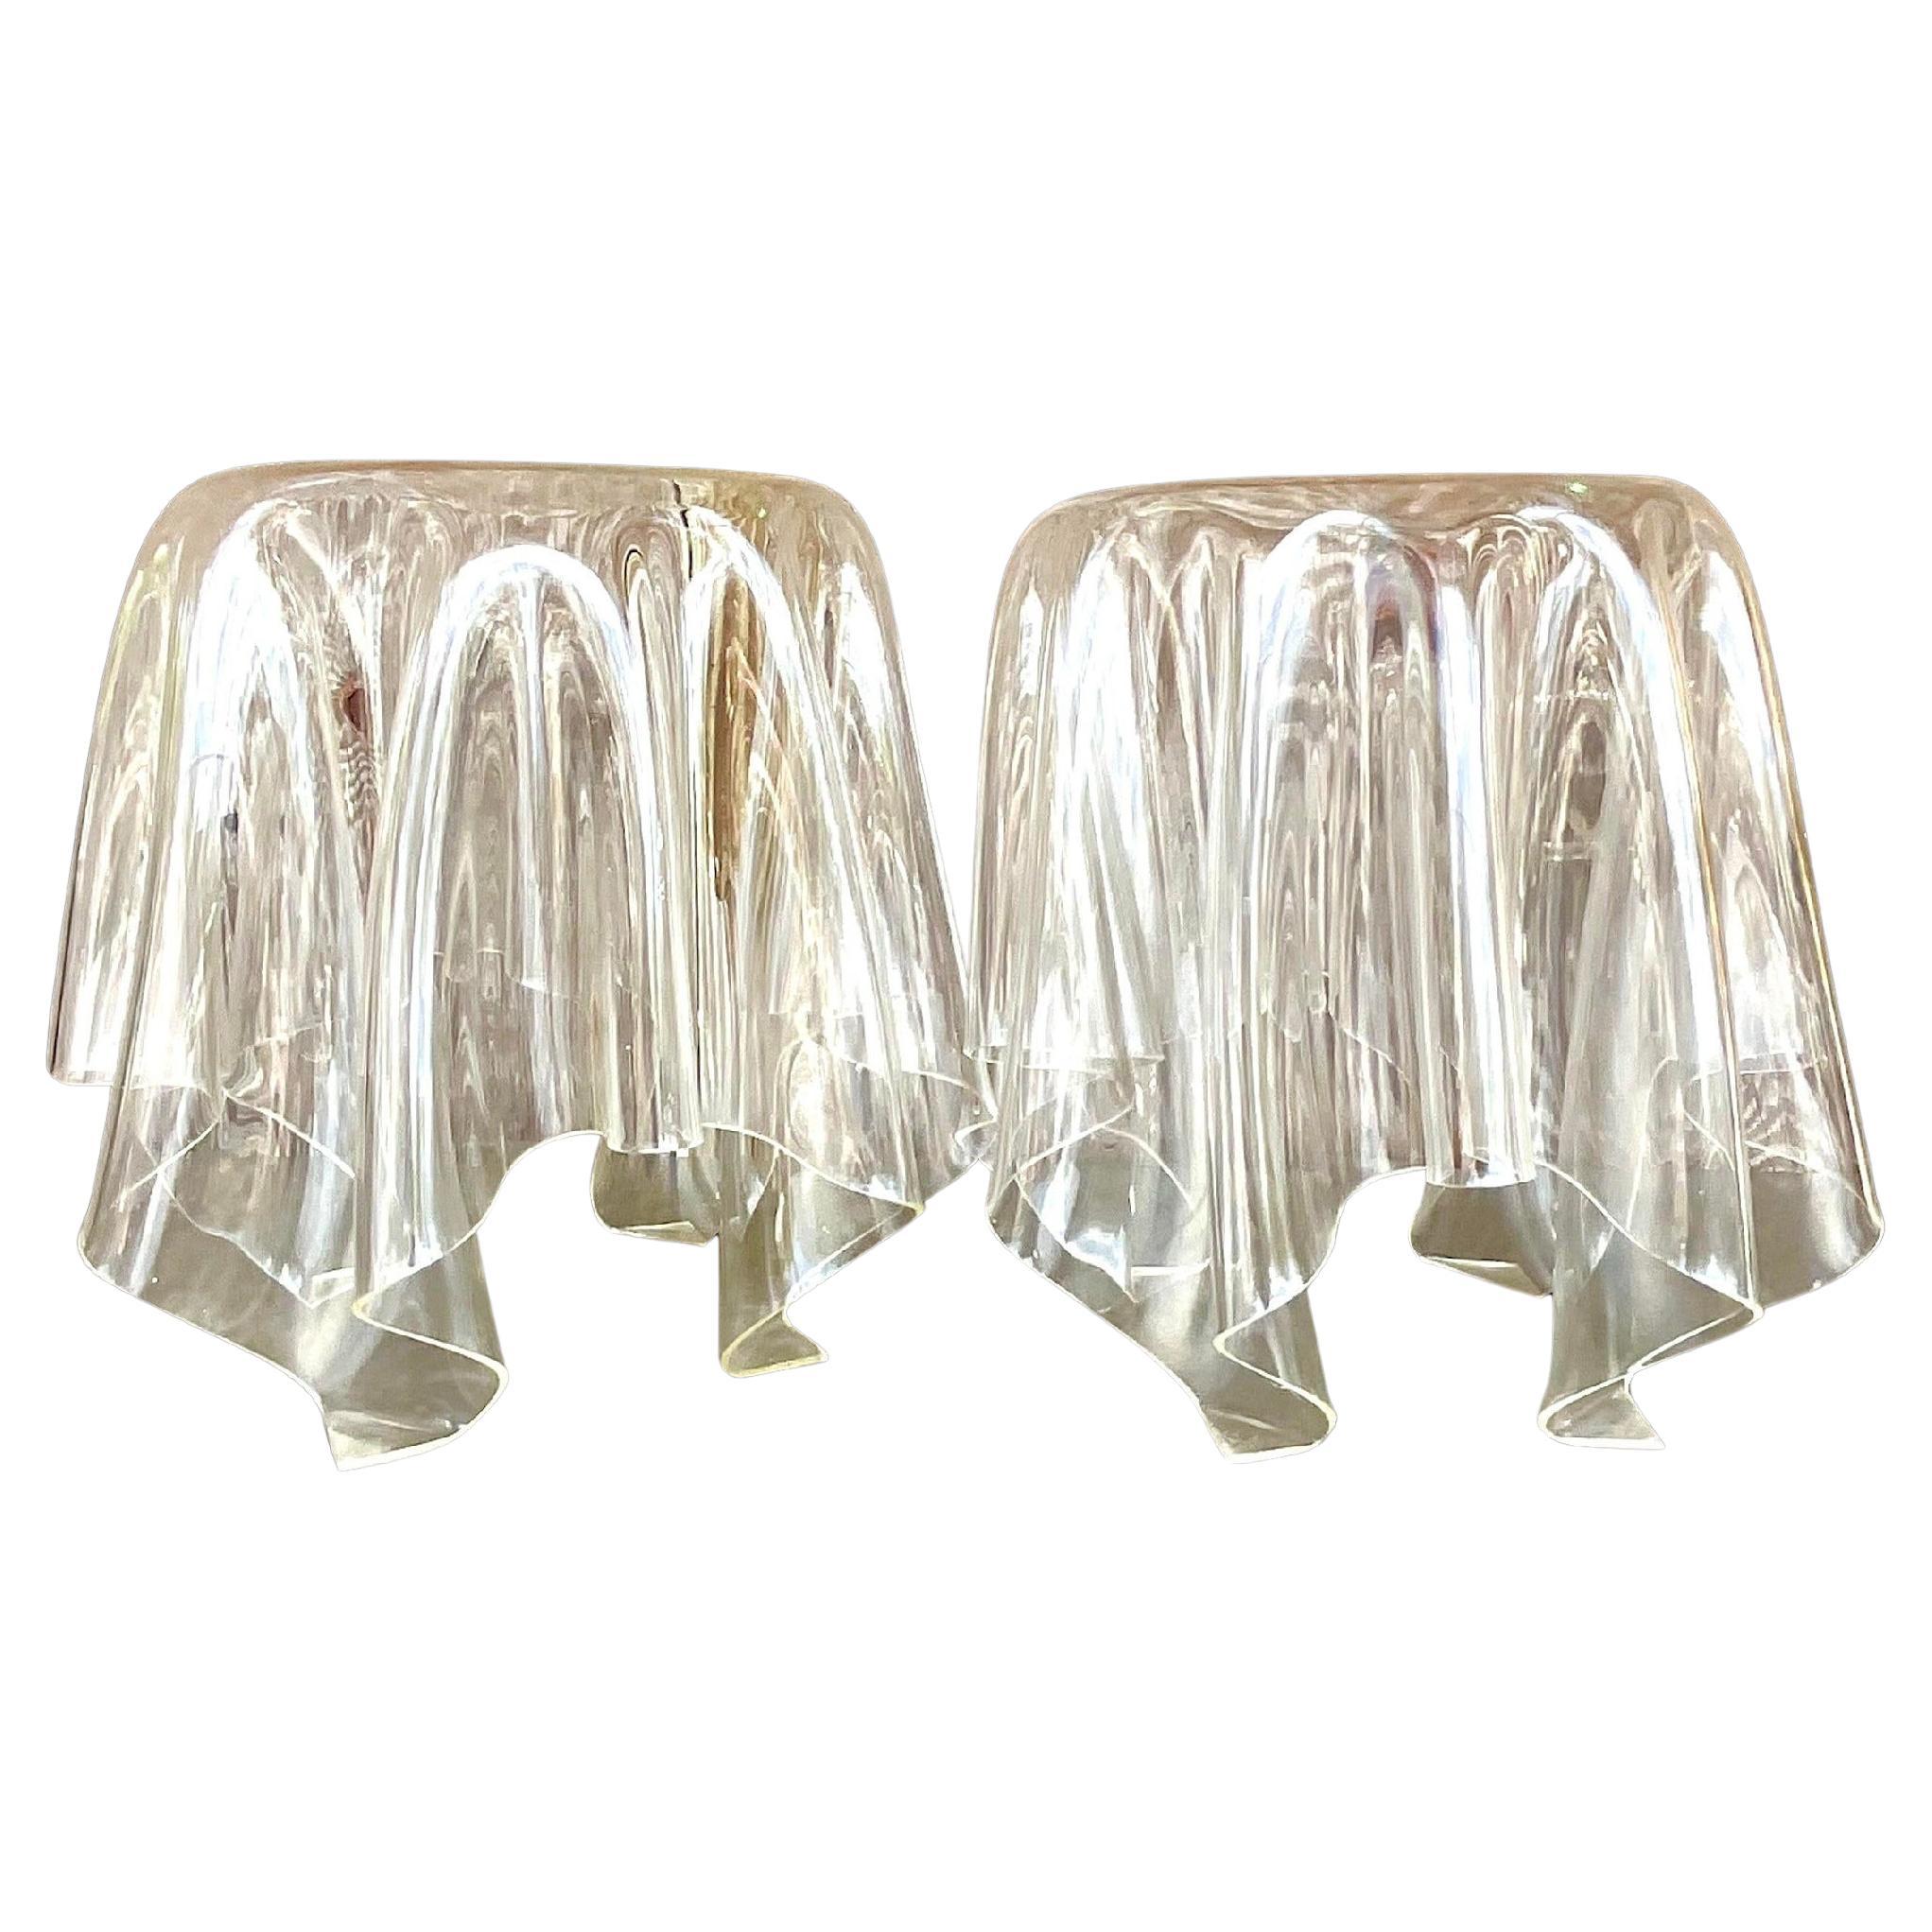 Late 20th Century Vintage Boho Molded Lucite Side Tables - a Pair For Sale